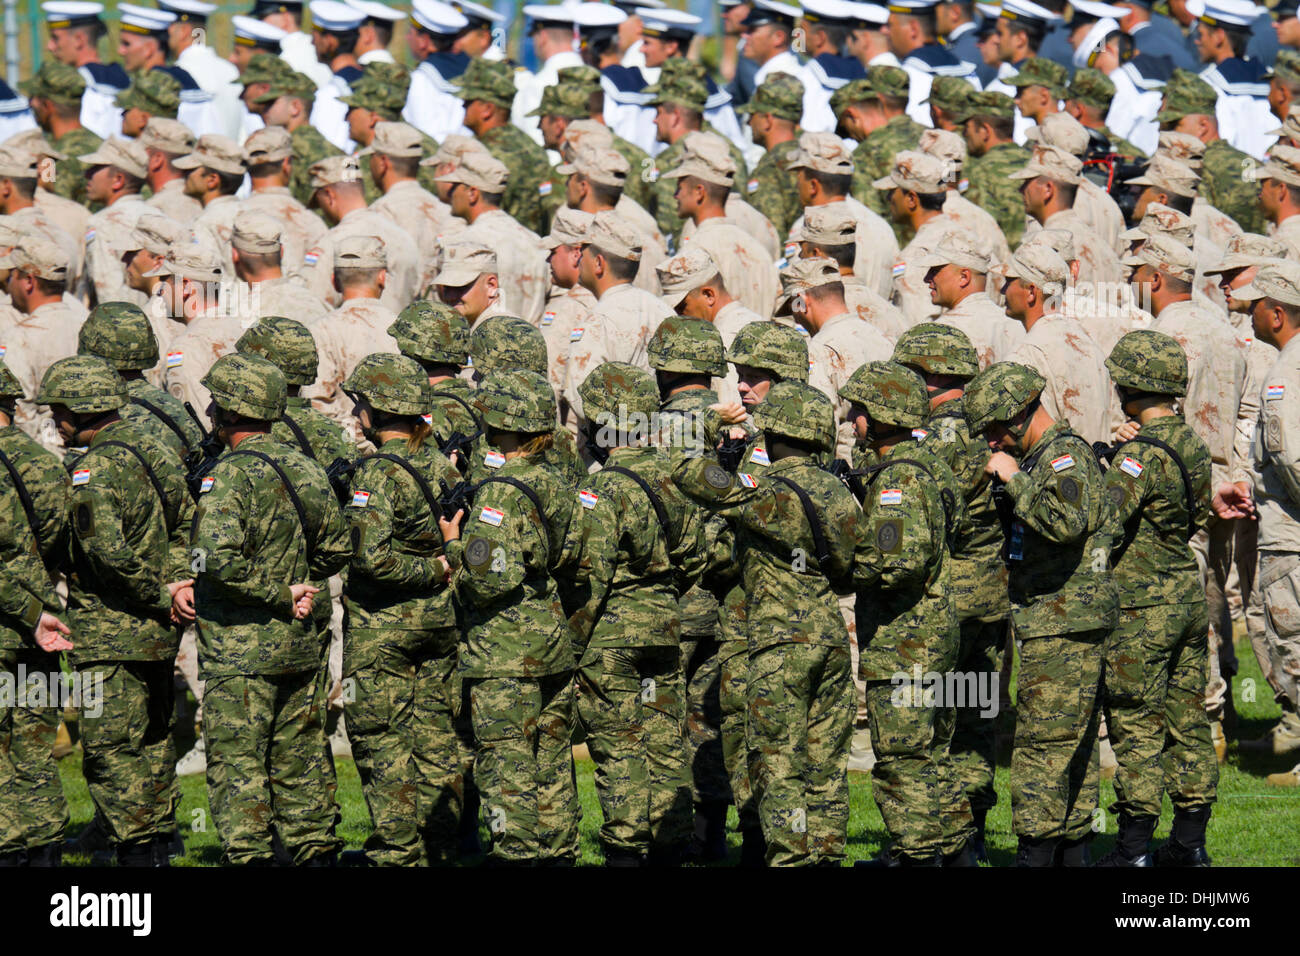 Croatian Army soldiers on parade Stock Photo